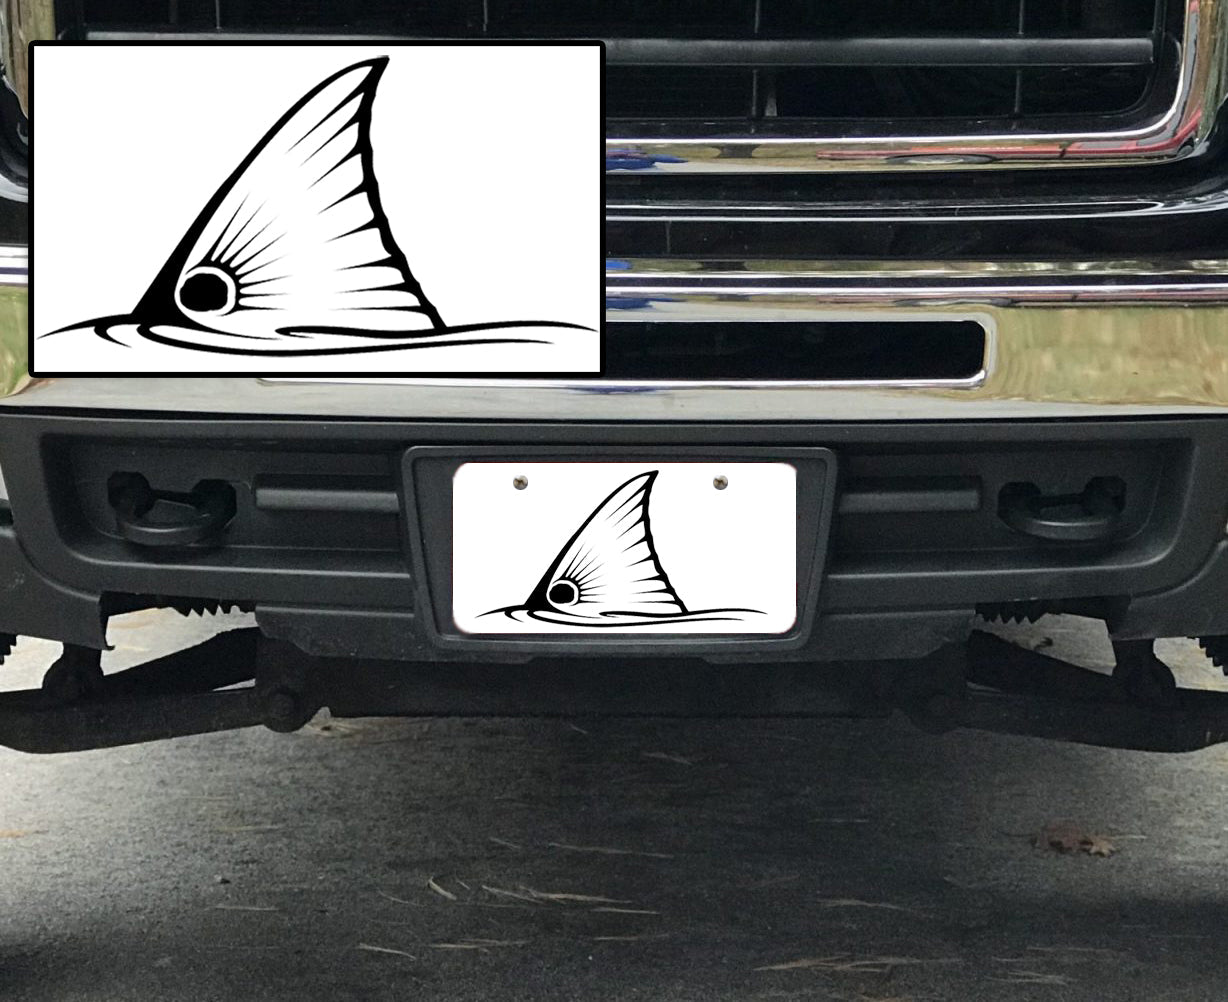 Fishing Front Vehicle License Plate Frame Cover - Skiff Life